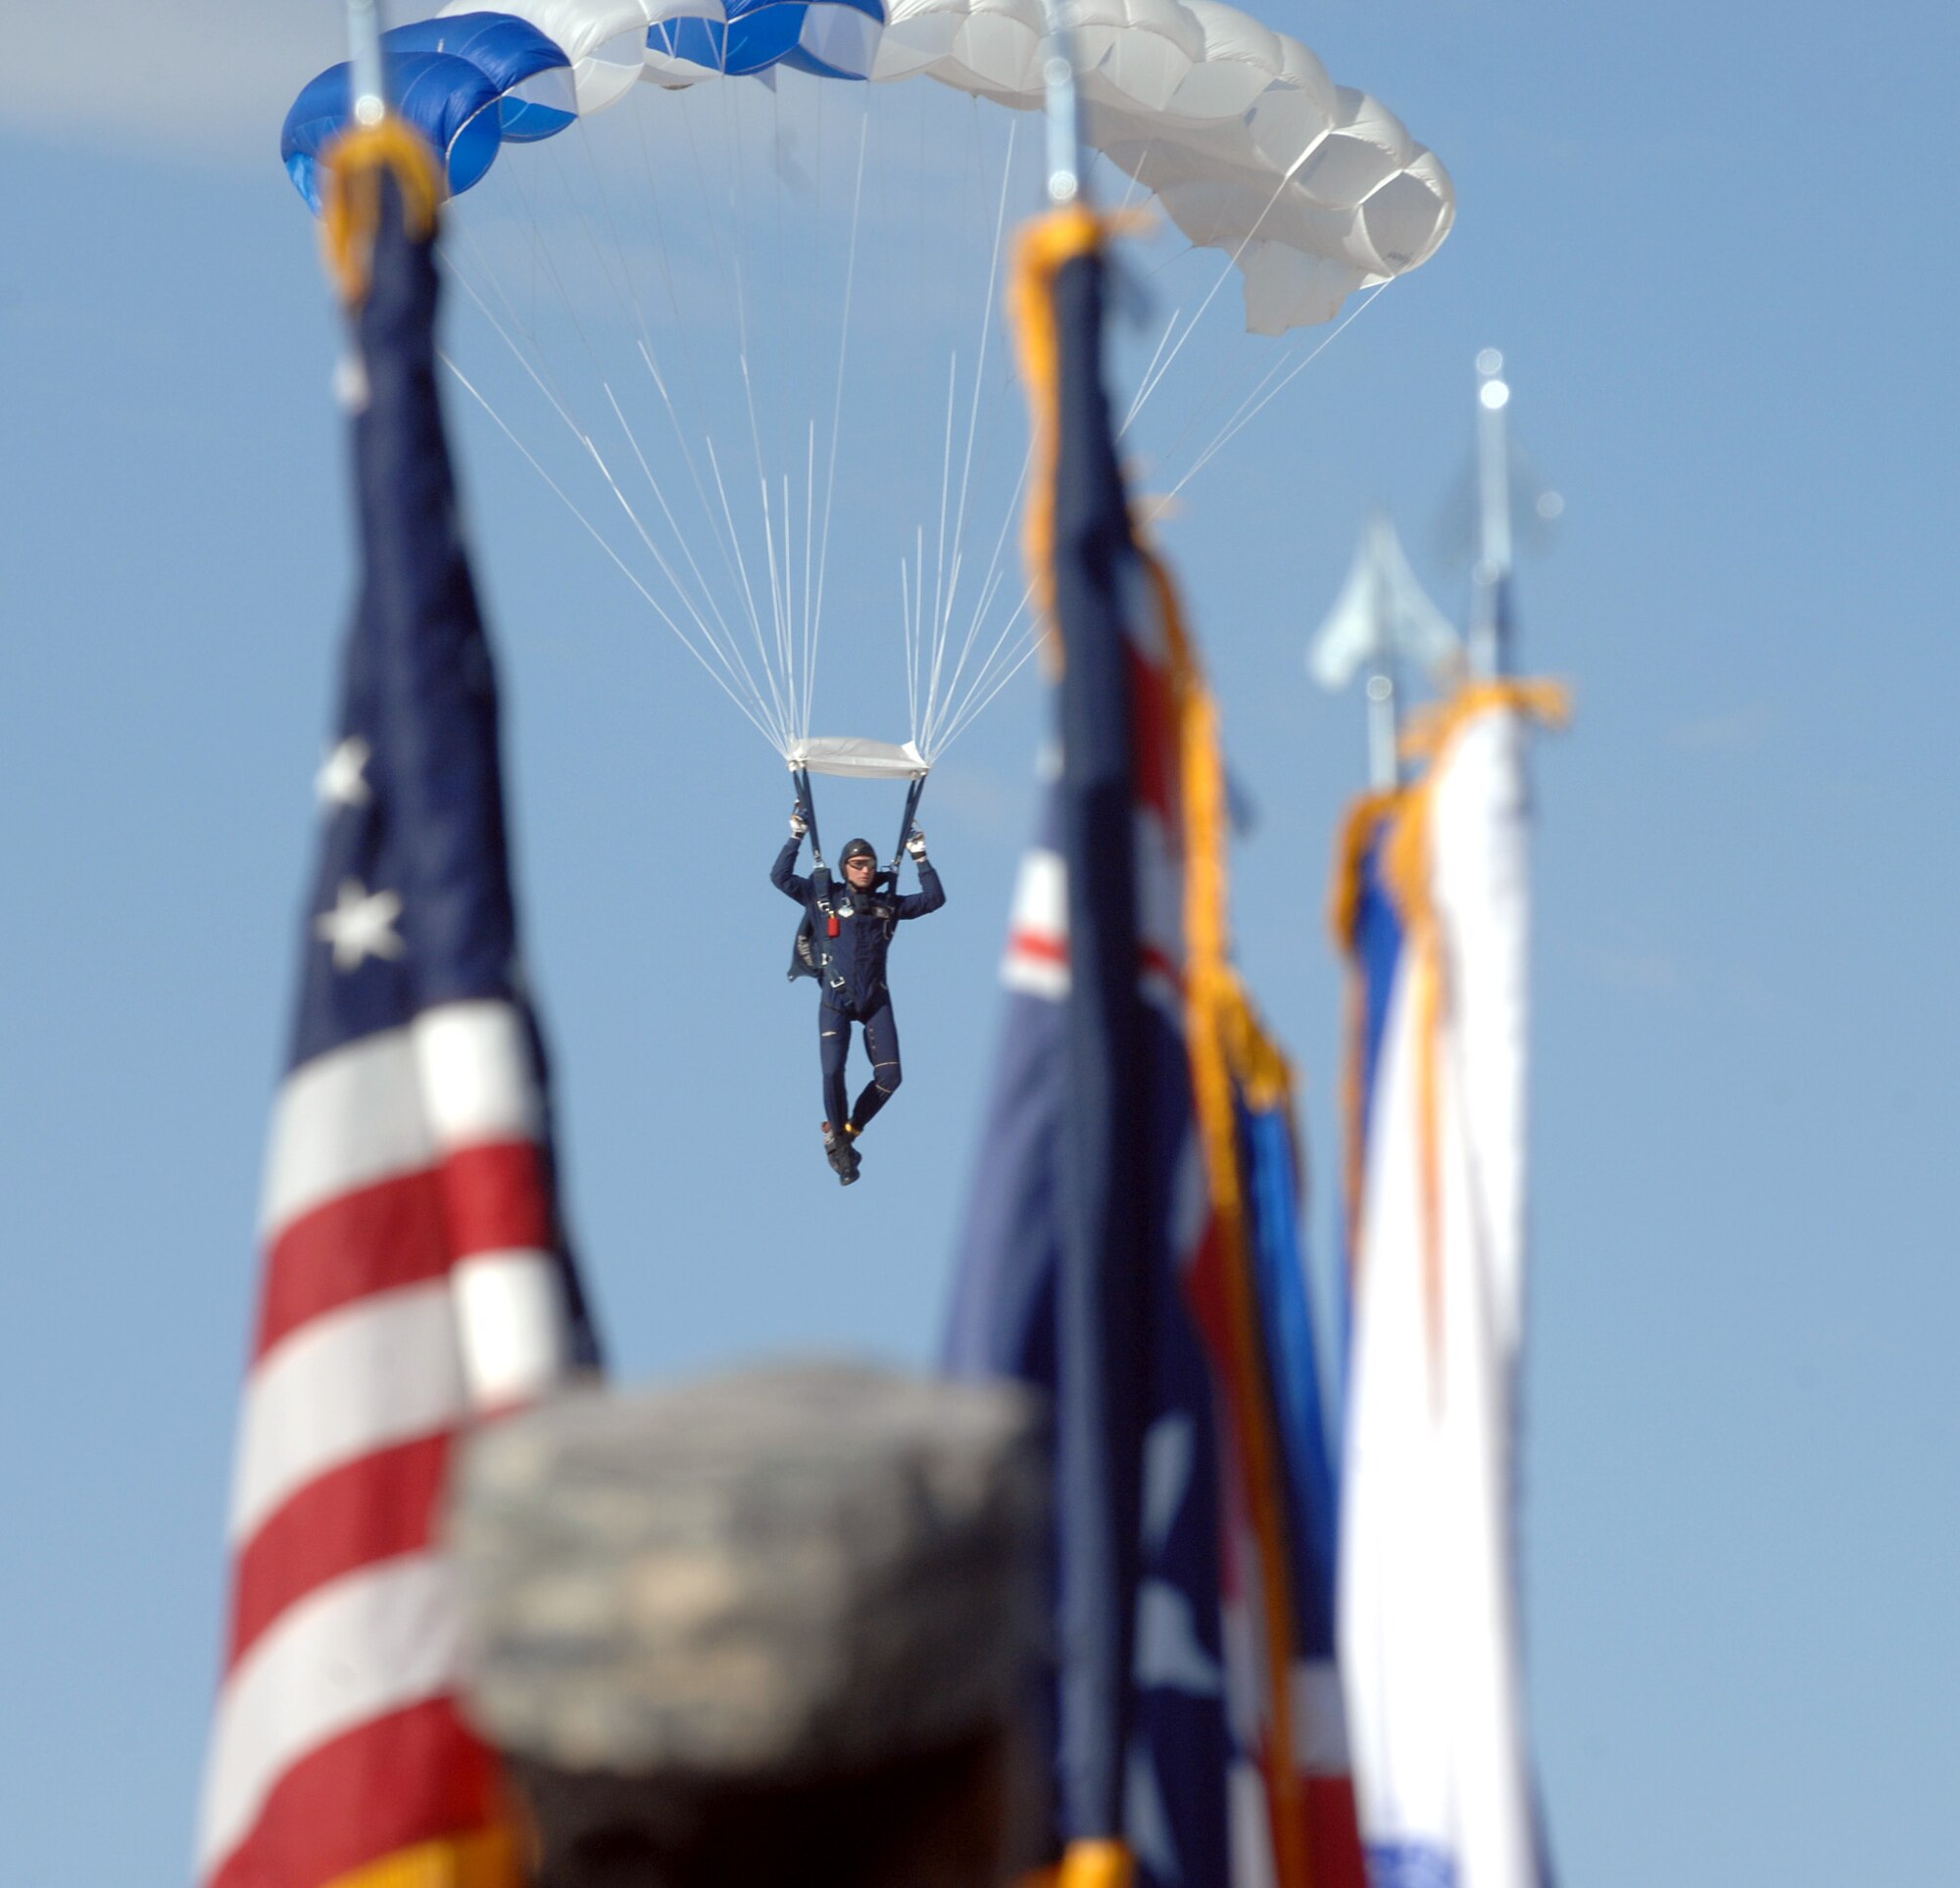 U.S. Air Force Master Sgt. Daniel McCaffrey, Wings of Blue Parachute Team member, prepares to land during the opening cermony of the 2015 U.S. Air Force Trials at Nellis Air Force Base, Nev., Feb. 27, 2015. Each year, the Wings of Blue conduct approxmiately 19,000 training jumps. (U.S. Air Force photo by Staff Sgt. Jack Sanders)